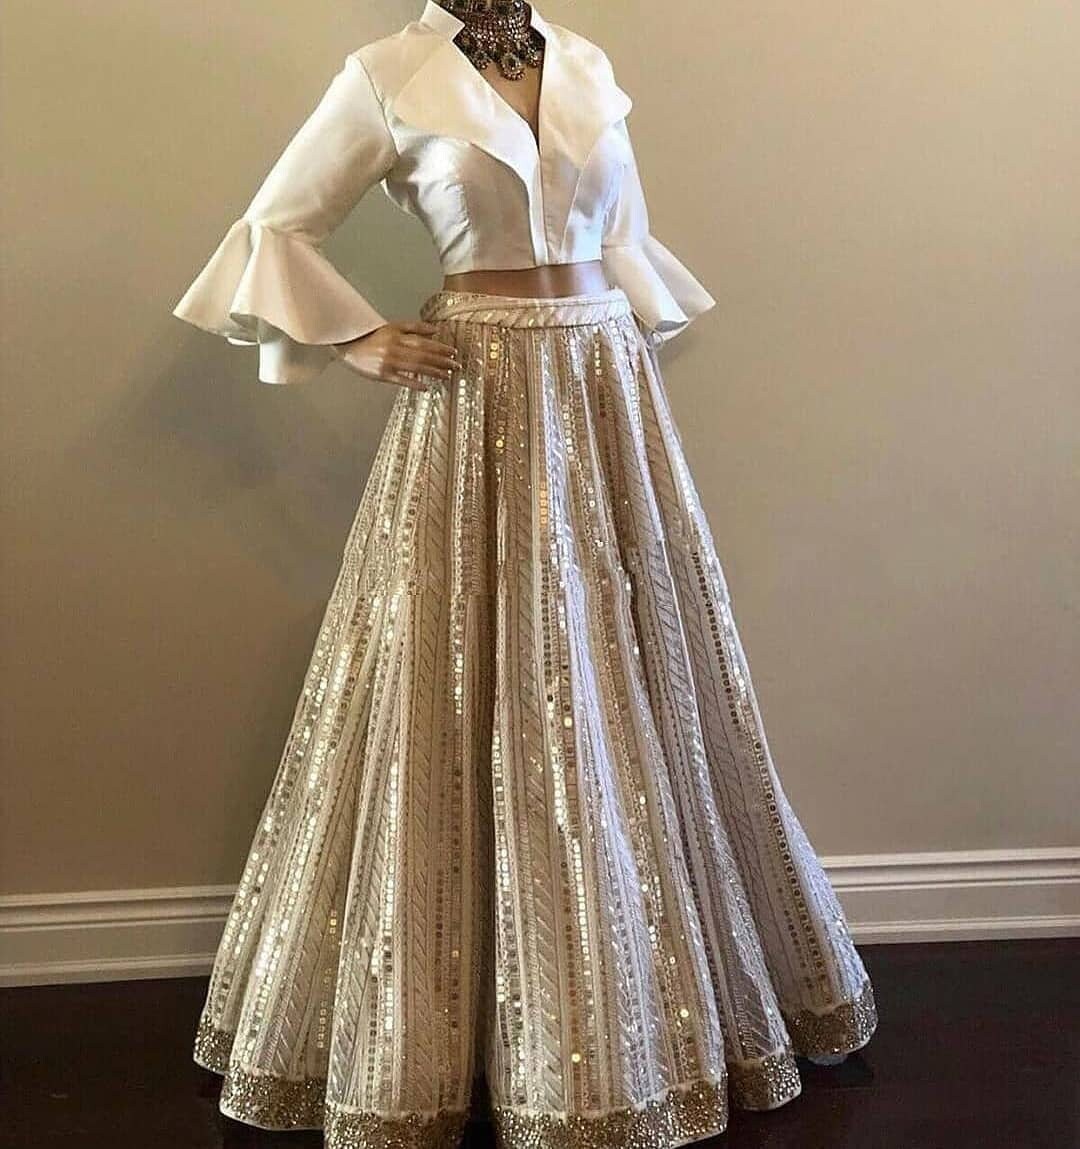 Buy Lehenga With Shirt Online In India - Etsy India-nlmtdanang.com.vn